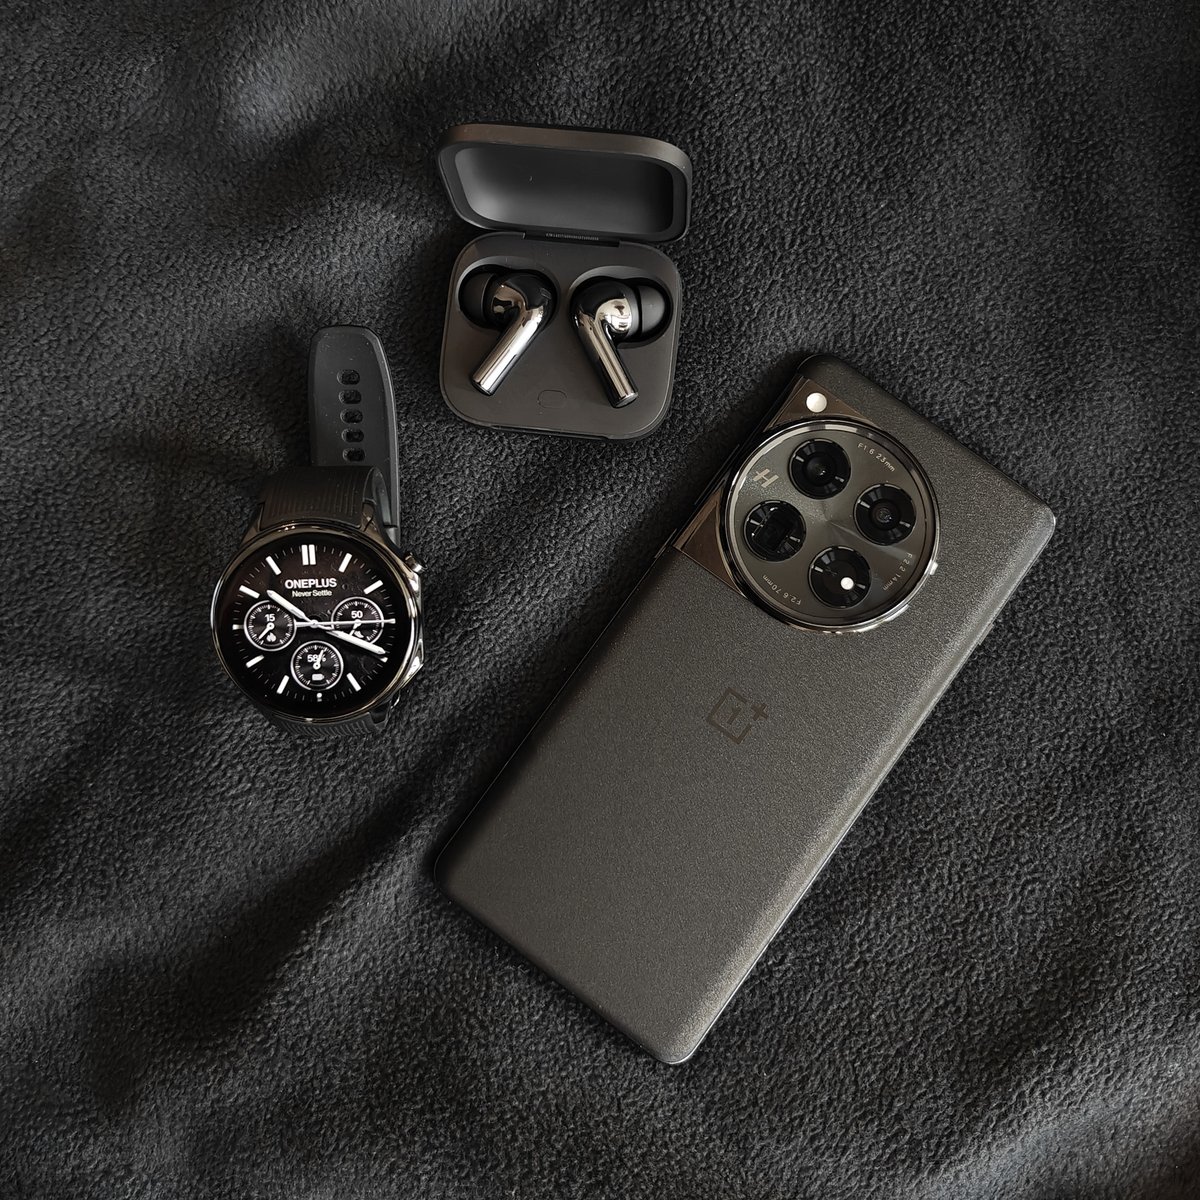 Let's see your everyday carry. 👇 #OnePlus12 #OnePlusWatch2 #OnePlusBuds3